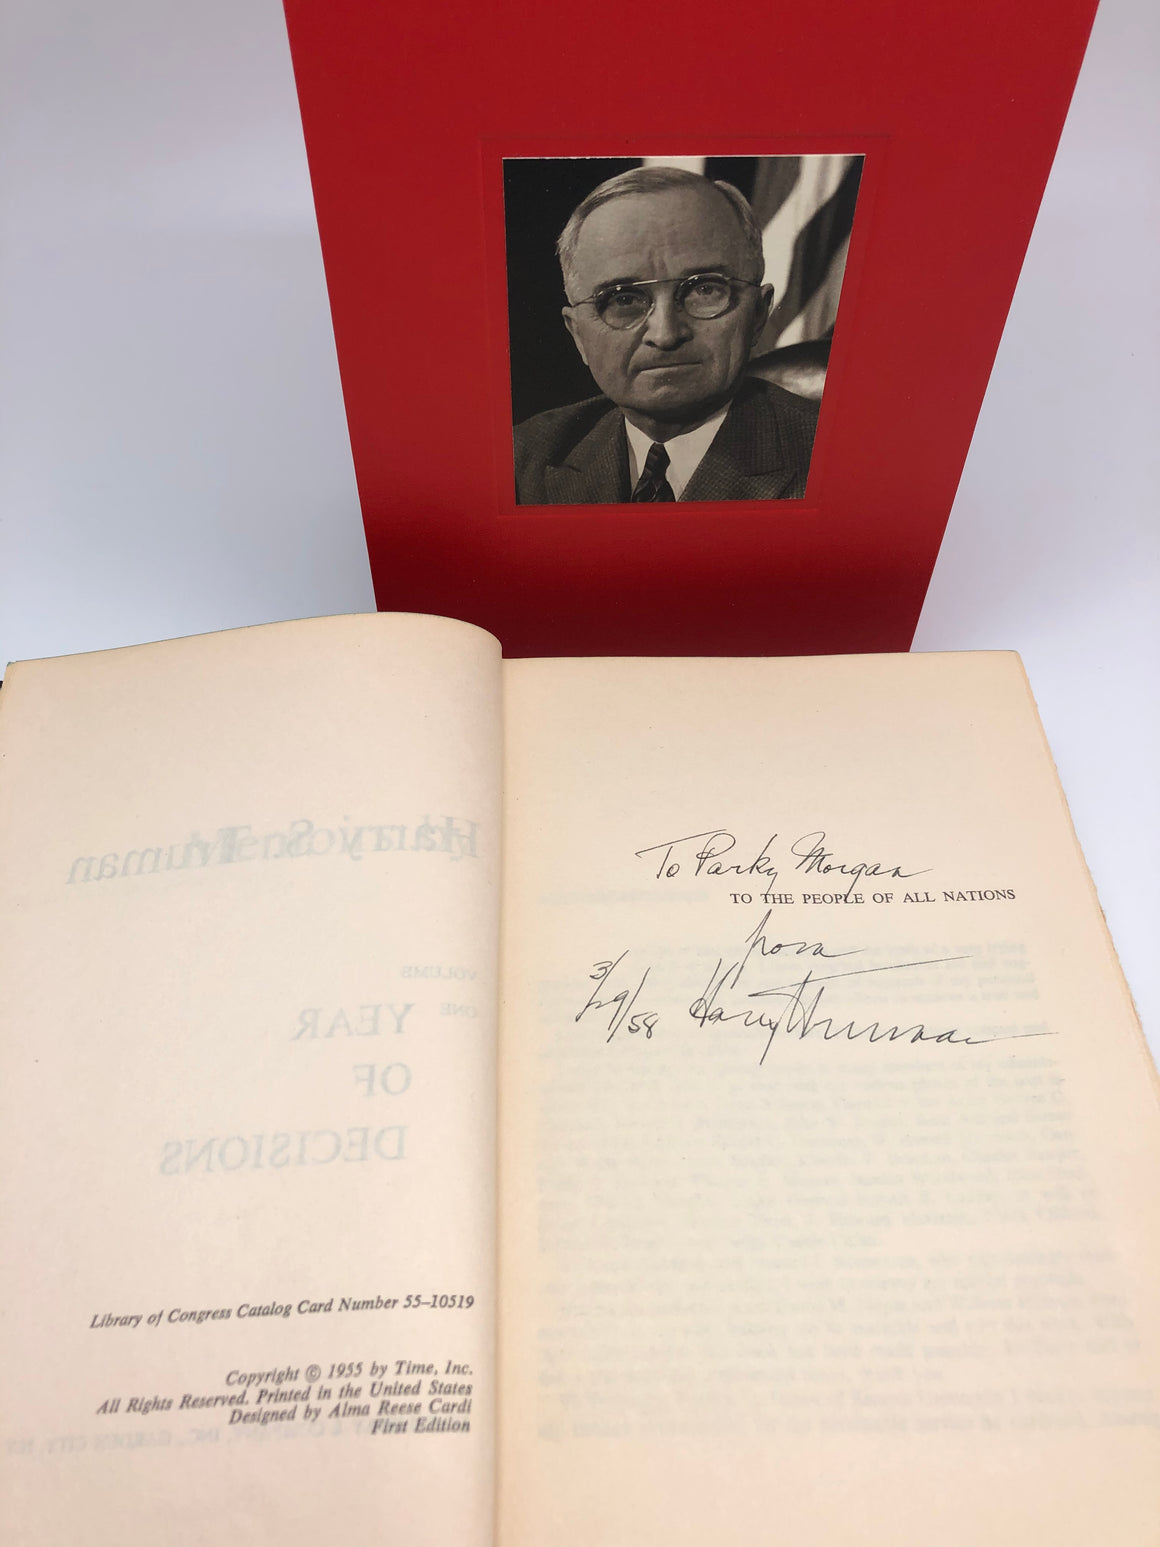 Memoirs: Year of Decisions and Years of Trial and Hope, Signed and Inscribed by Harry S. Truman, 1955-56